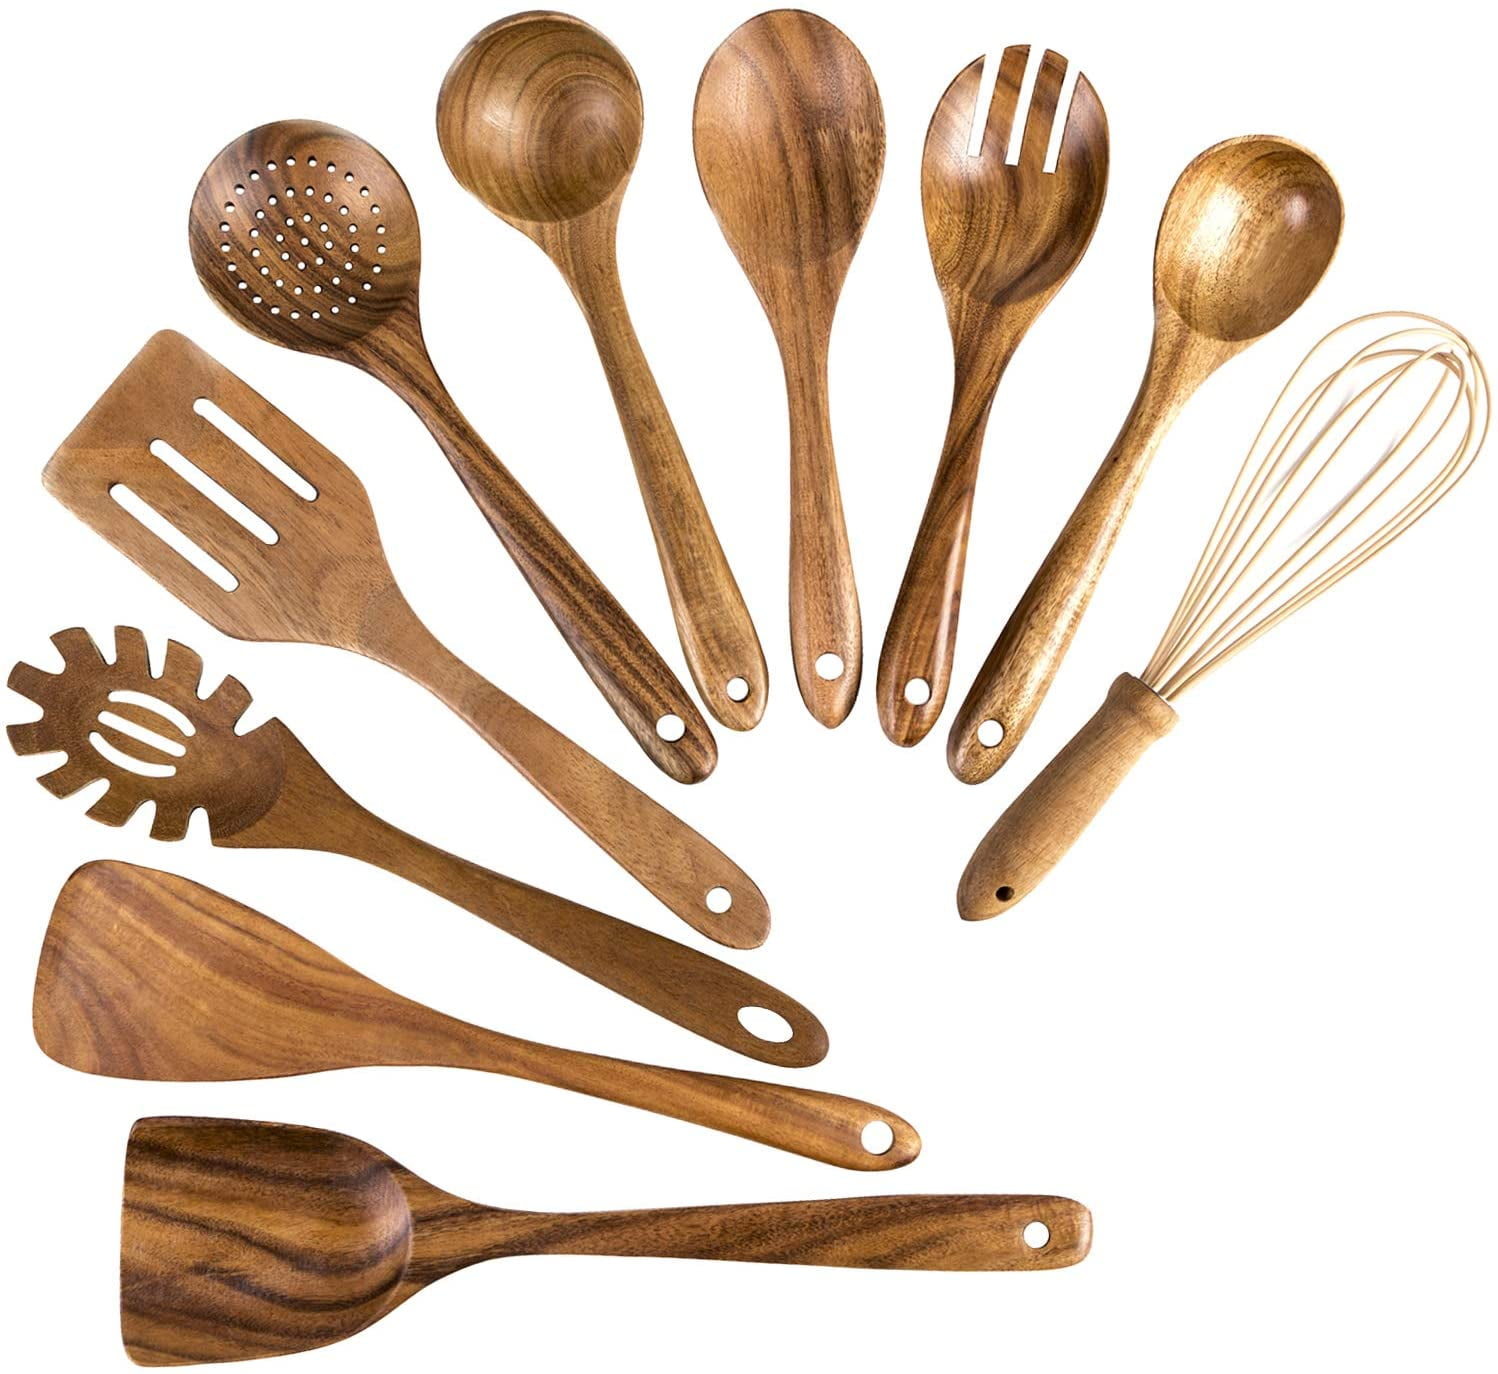 WOODENHOUSE LIFELONG QUALITY wooden spoons for cooking, 10 pcs teak wood  cooking utensil set - wooden kitchen